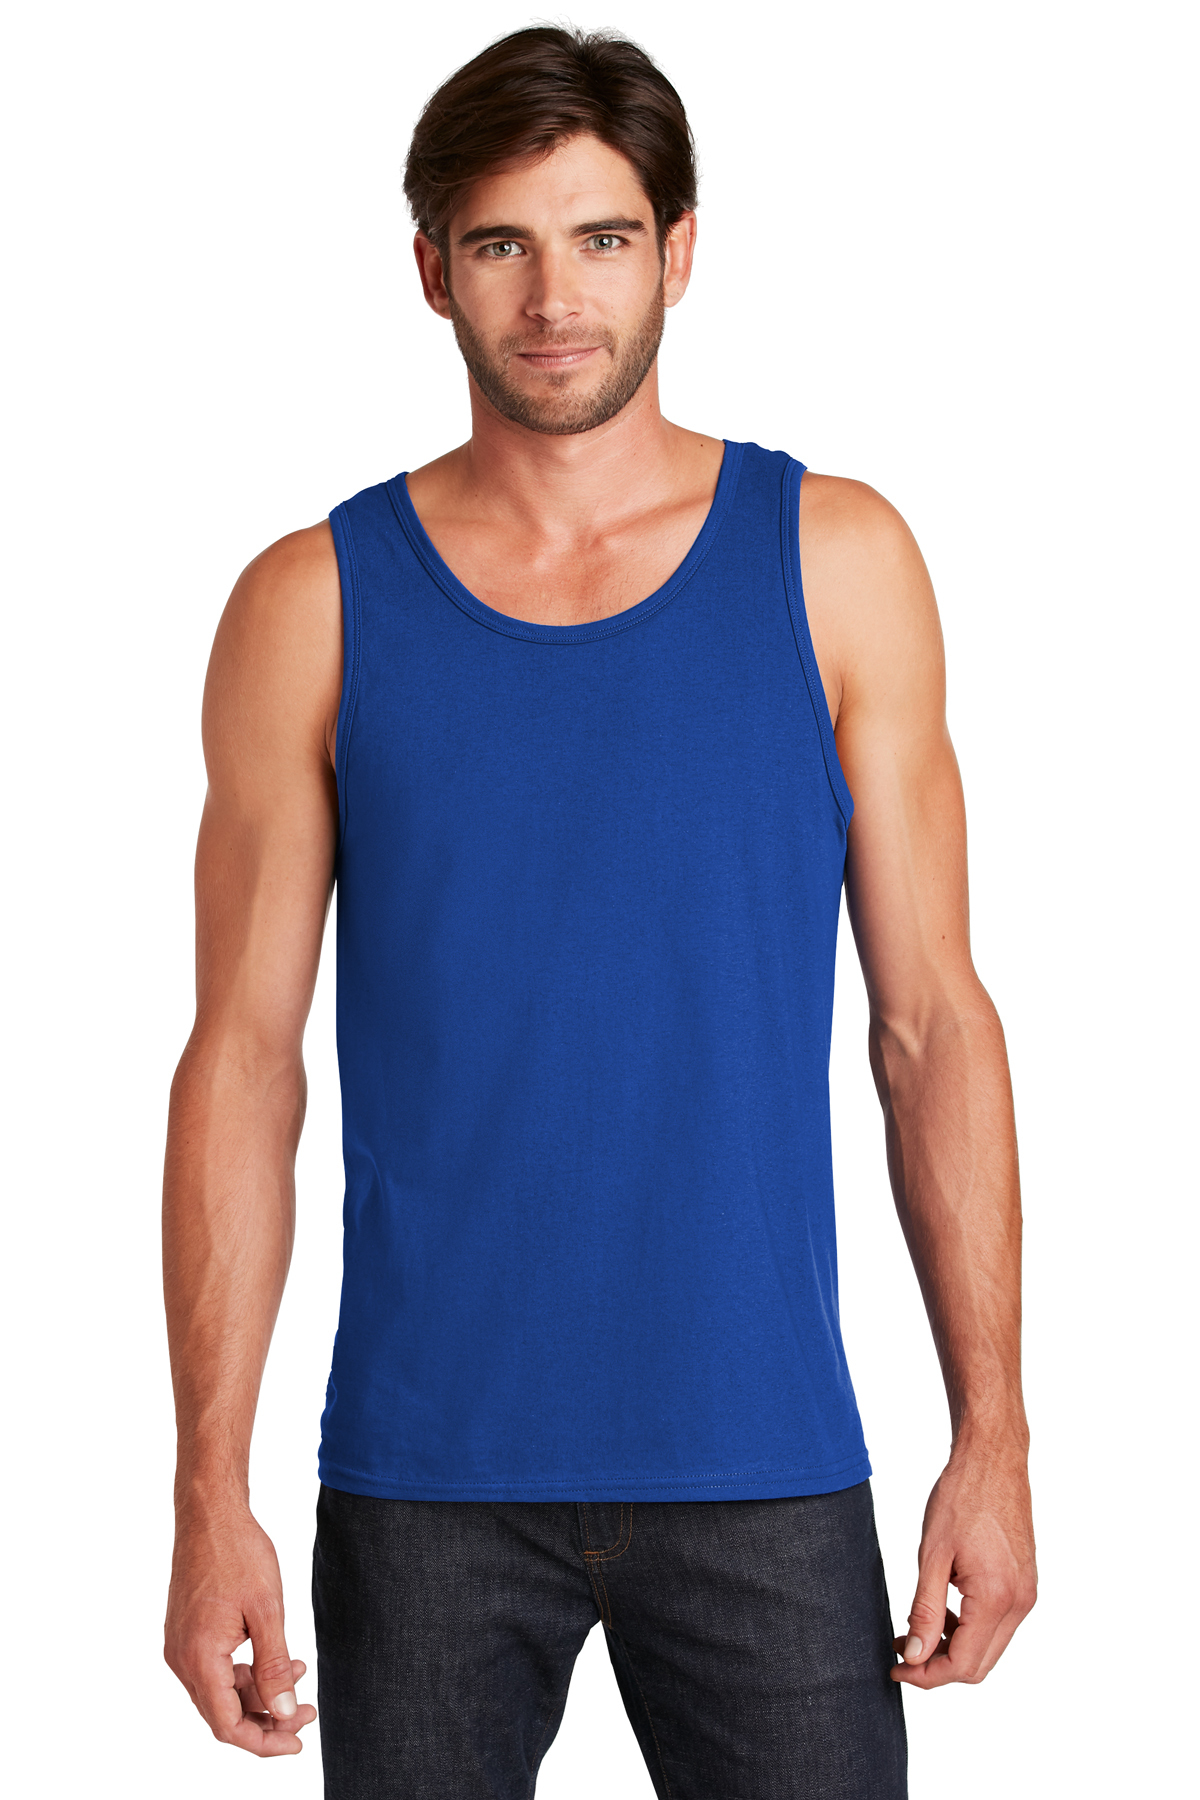 District The Concert Tank | Product | District